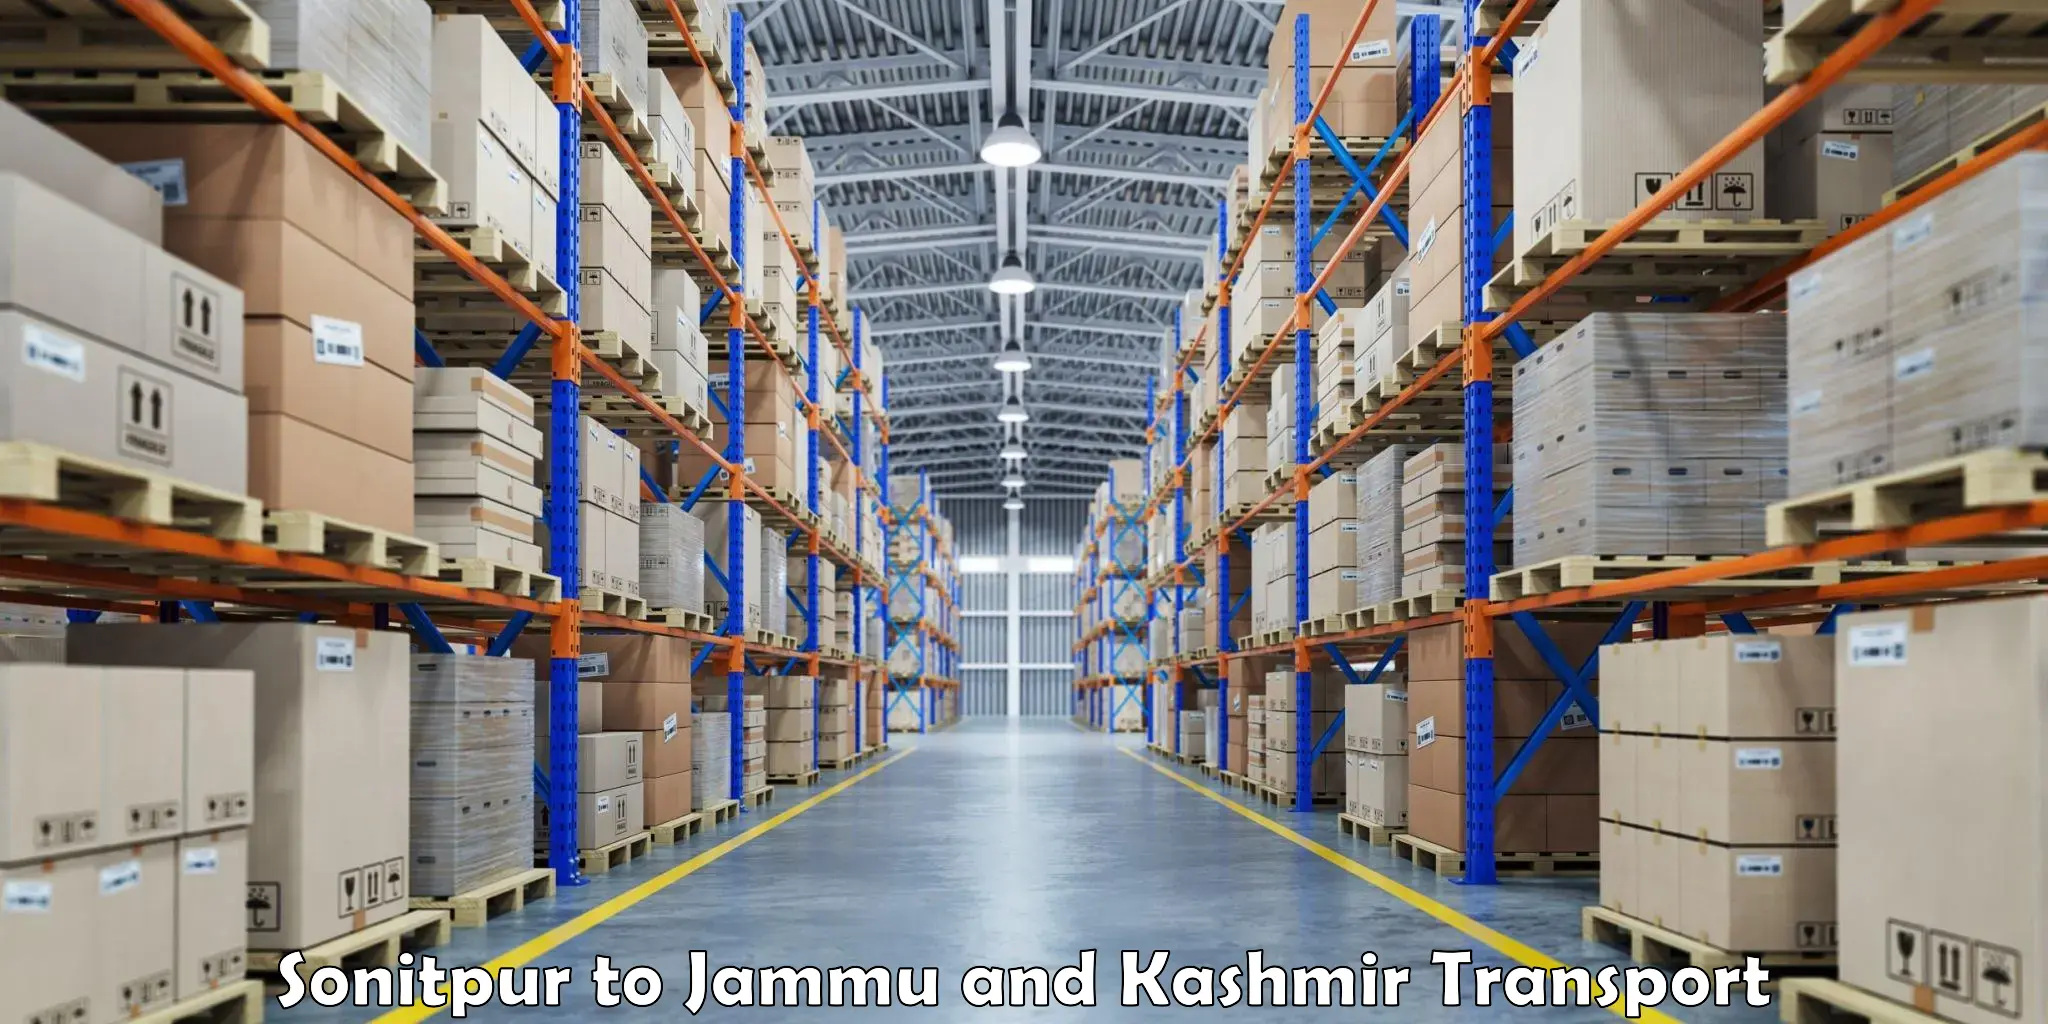 Parcel transport services Sonitpur to Baramulla